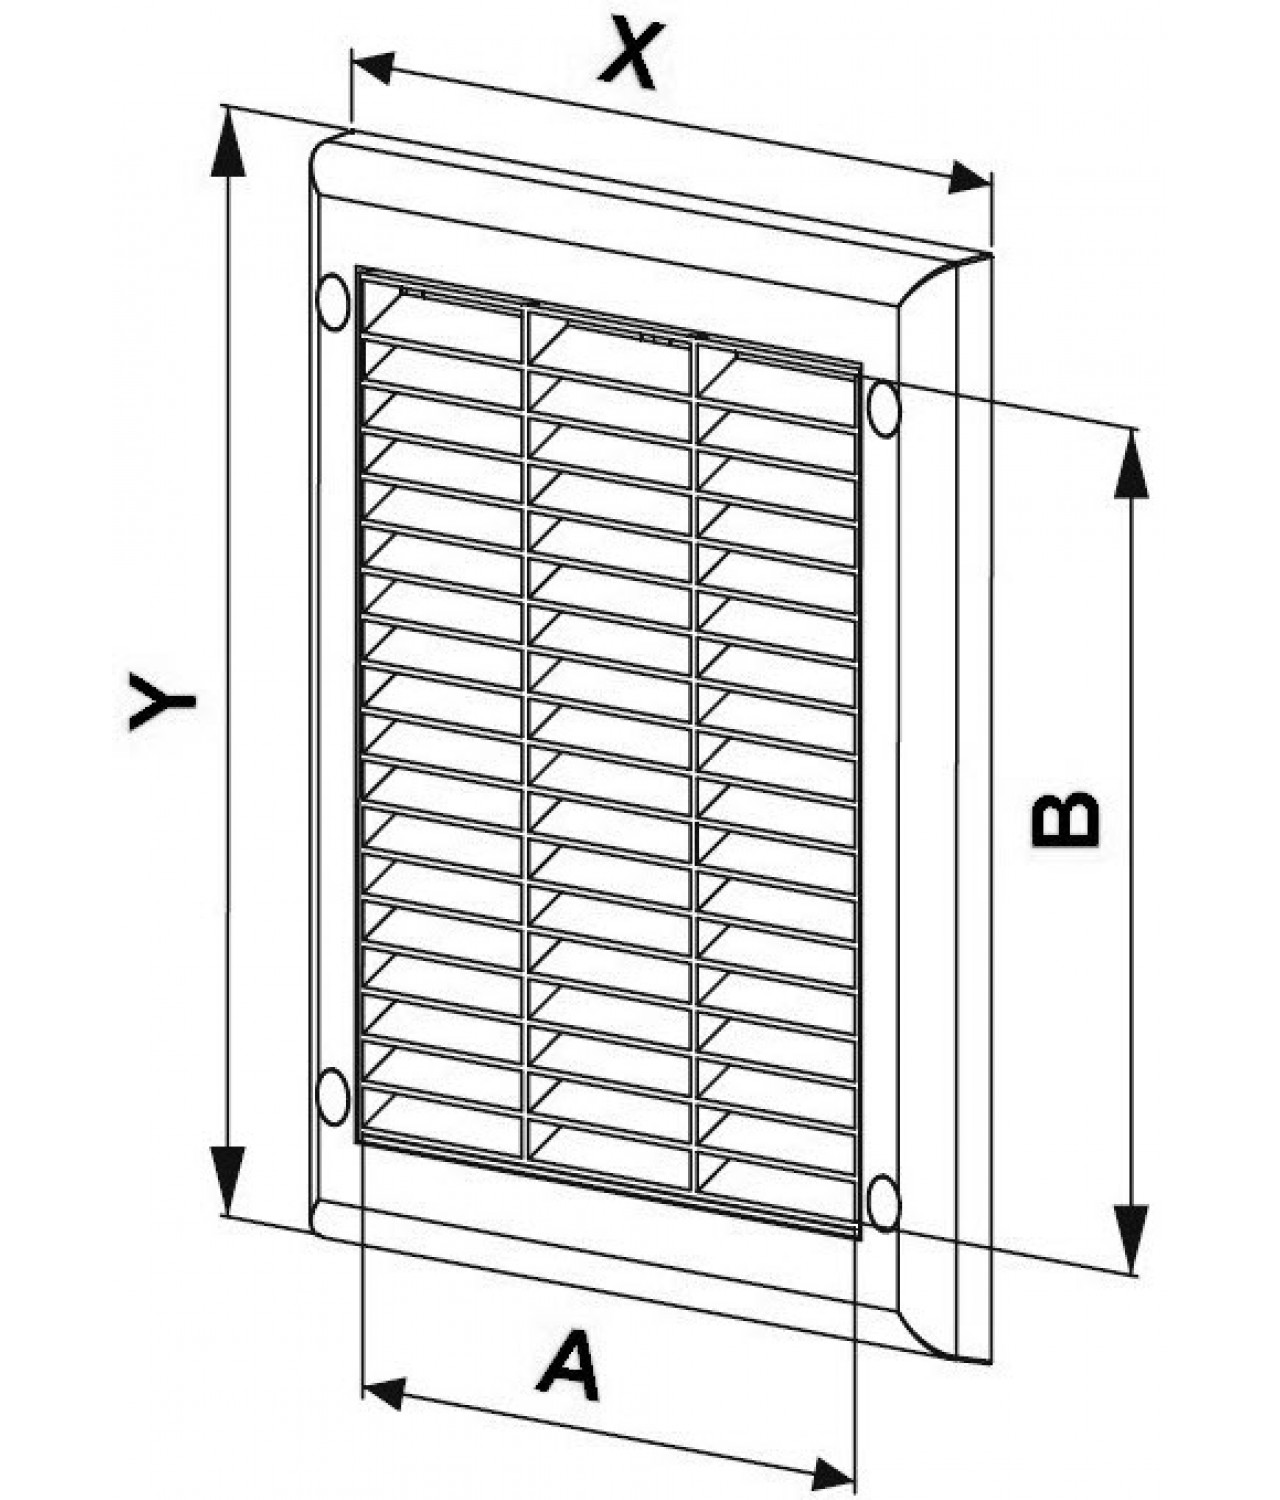 Ventilation grille with shutter GRTK4, 190x260 mm - drawing